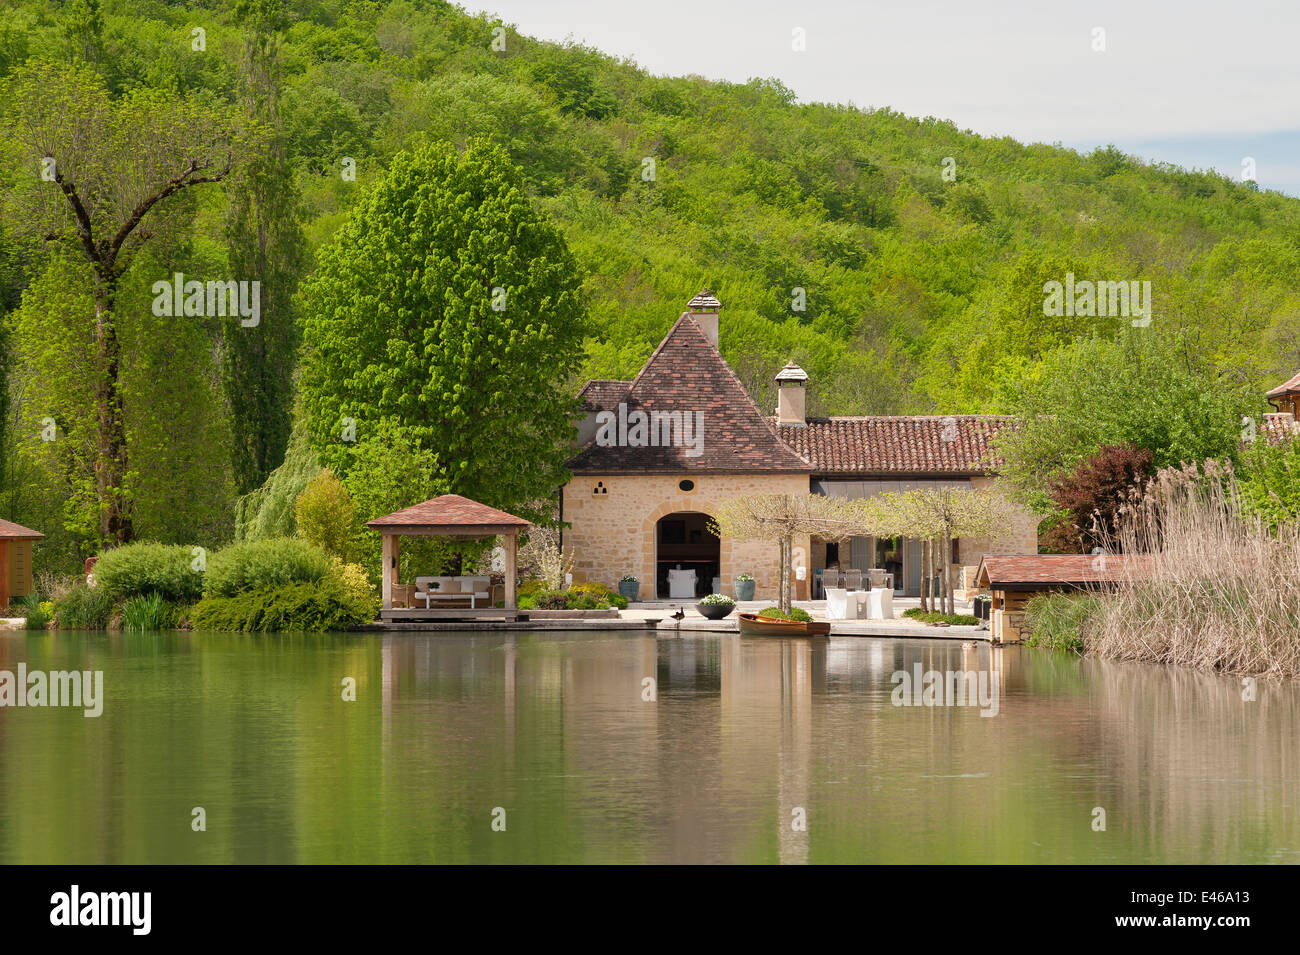 Exterior facade of a 17th century french mill seen from across a small lake Stock Photo